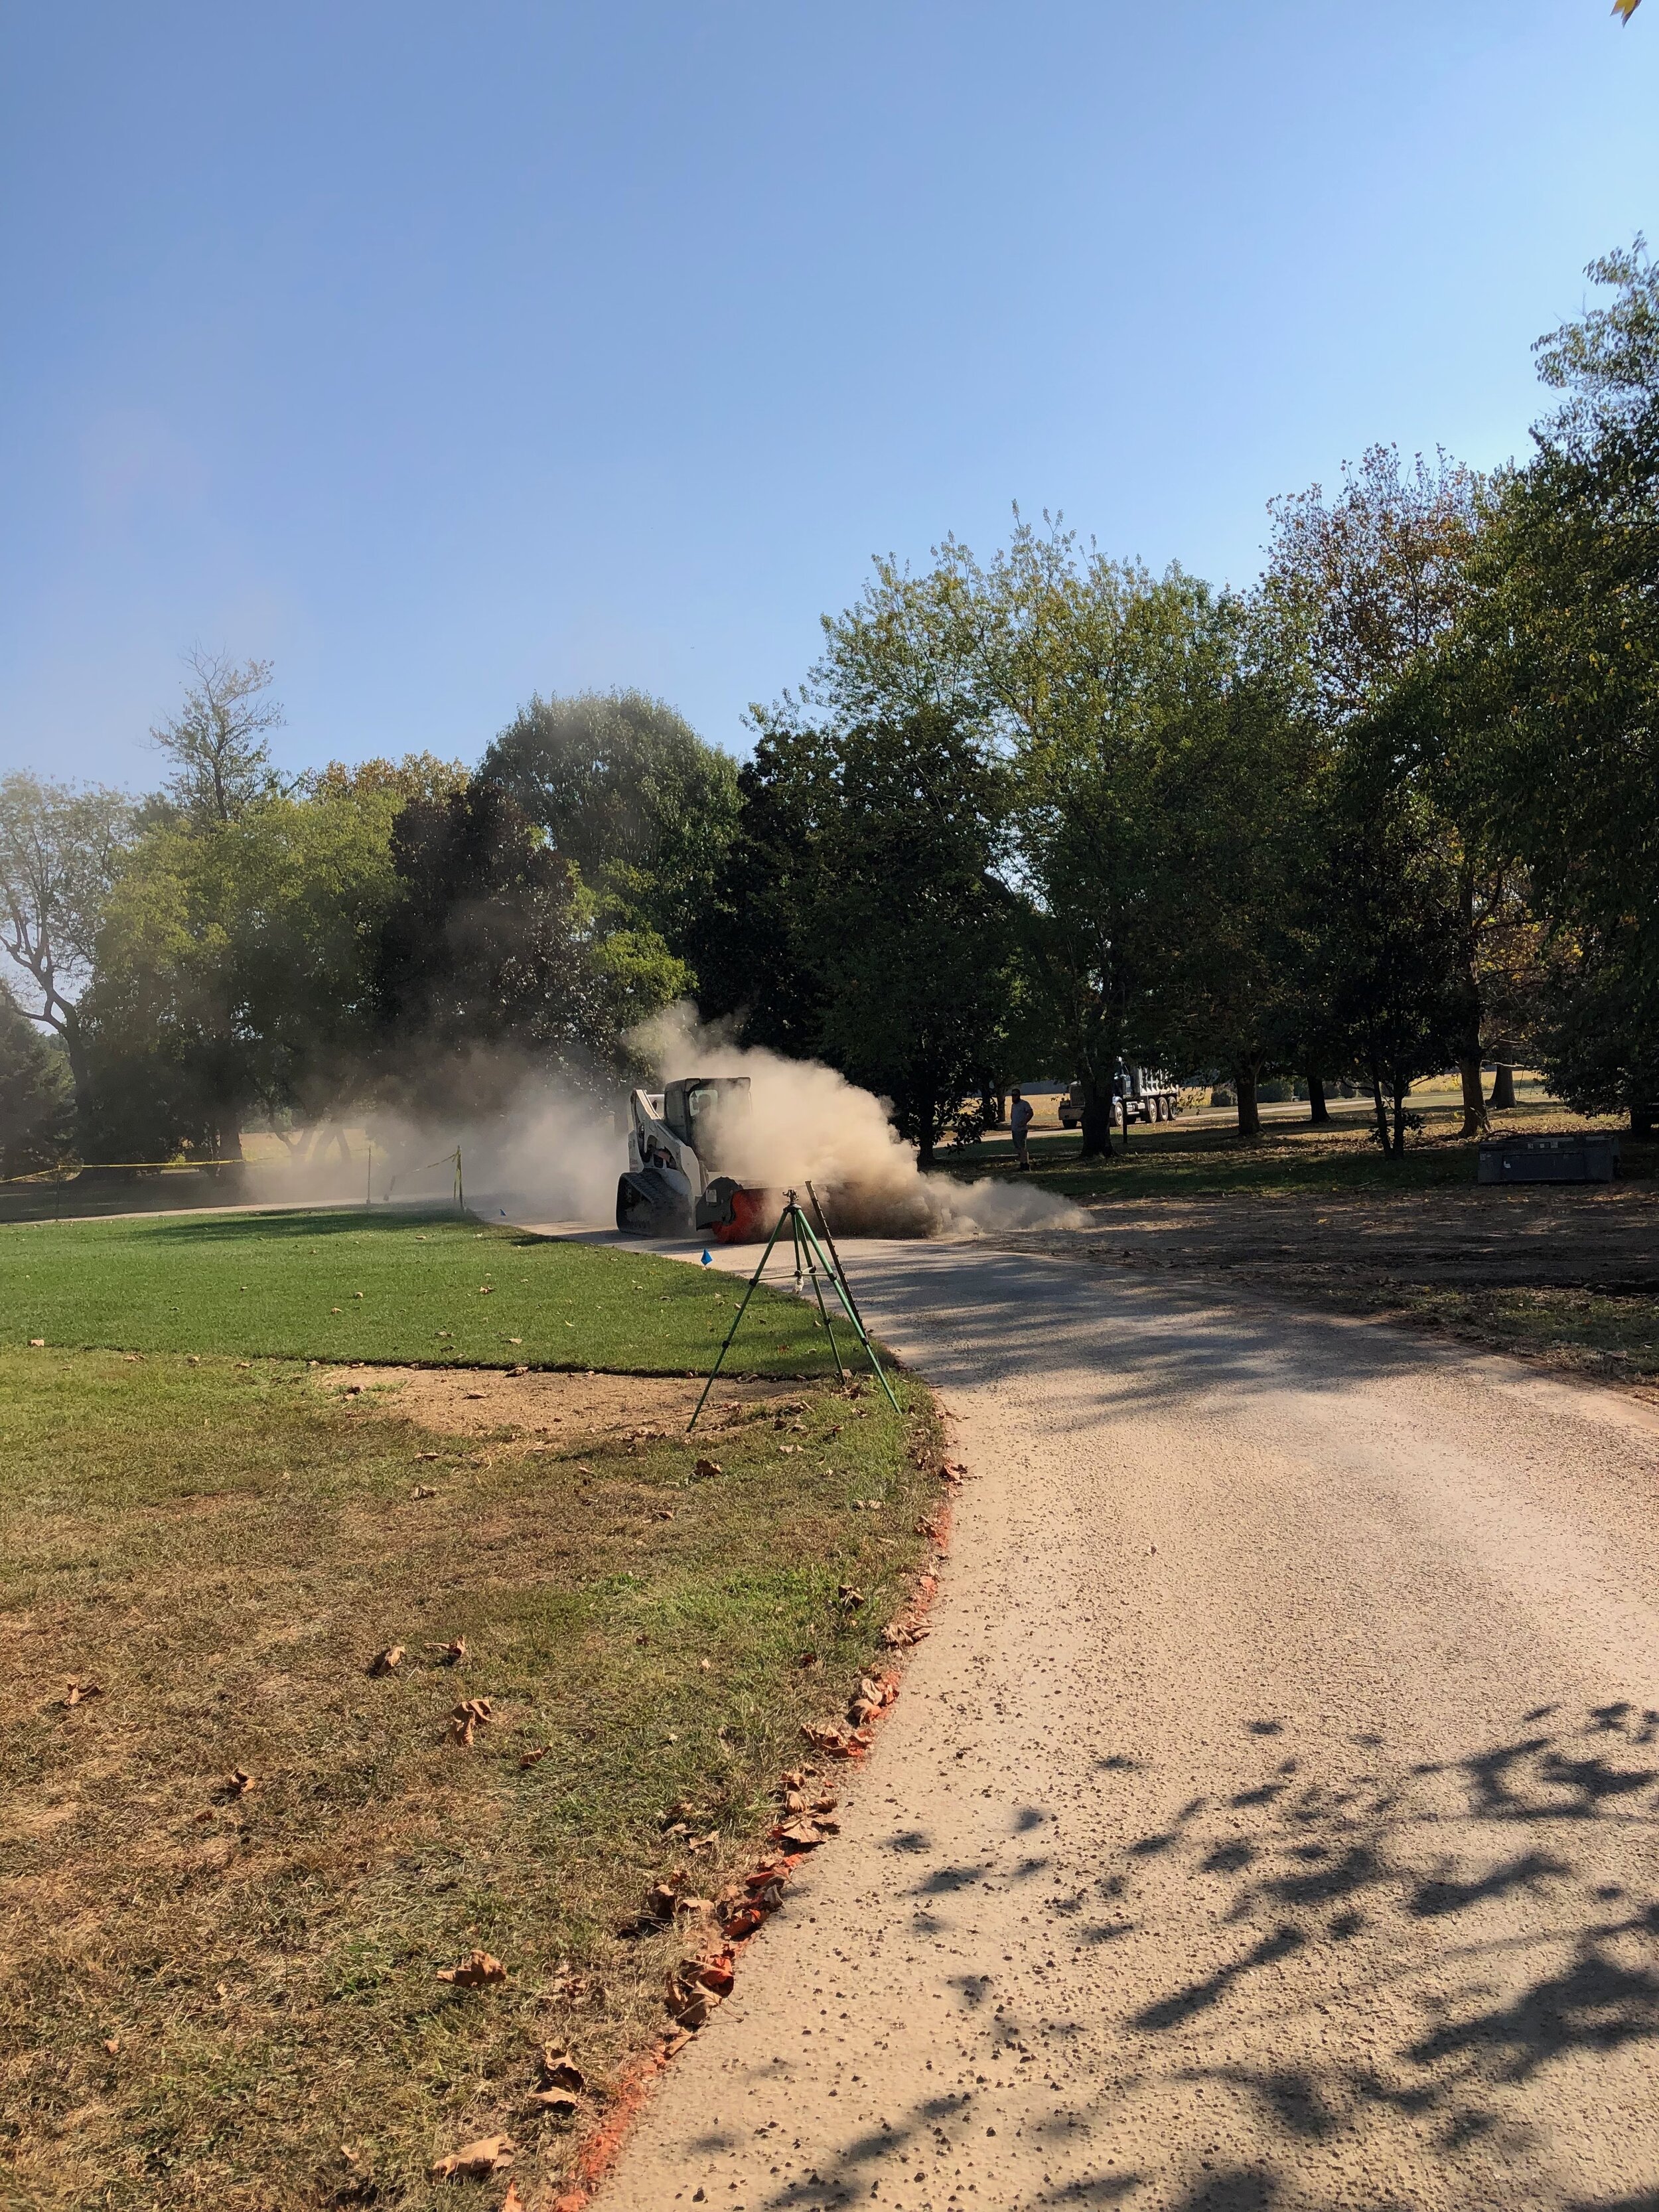 Kicking the dust up in preparation for new driveway.